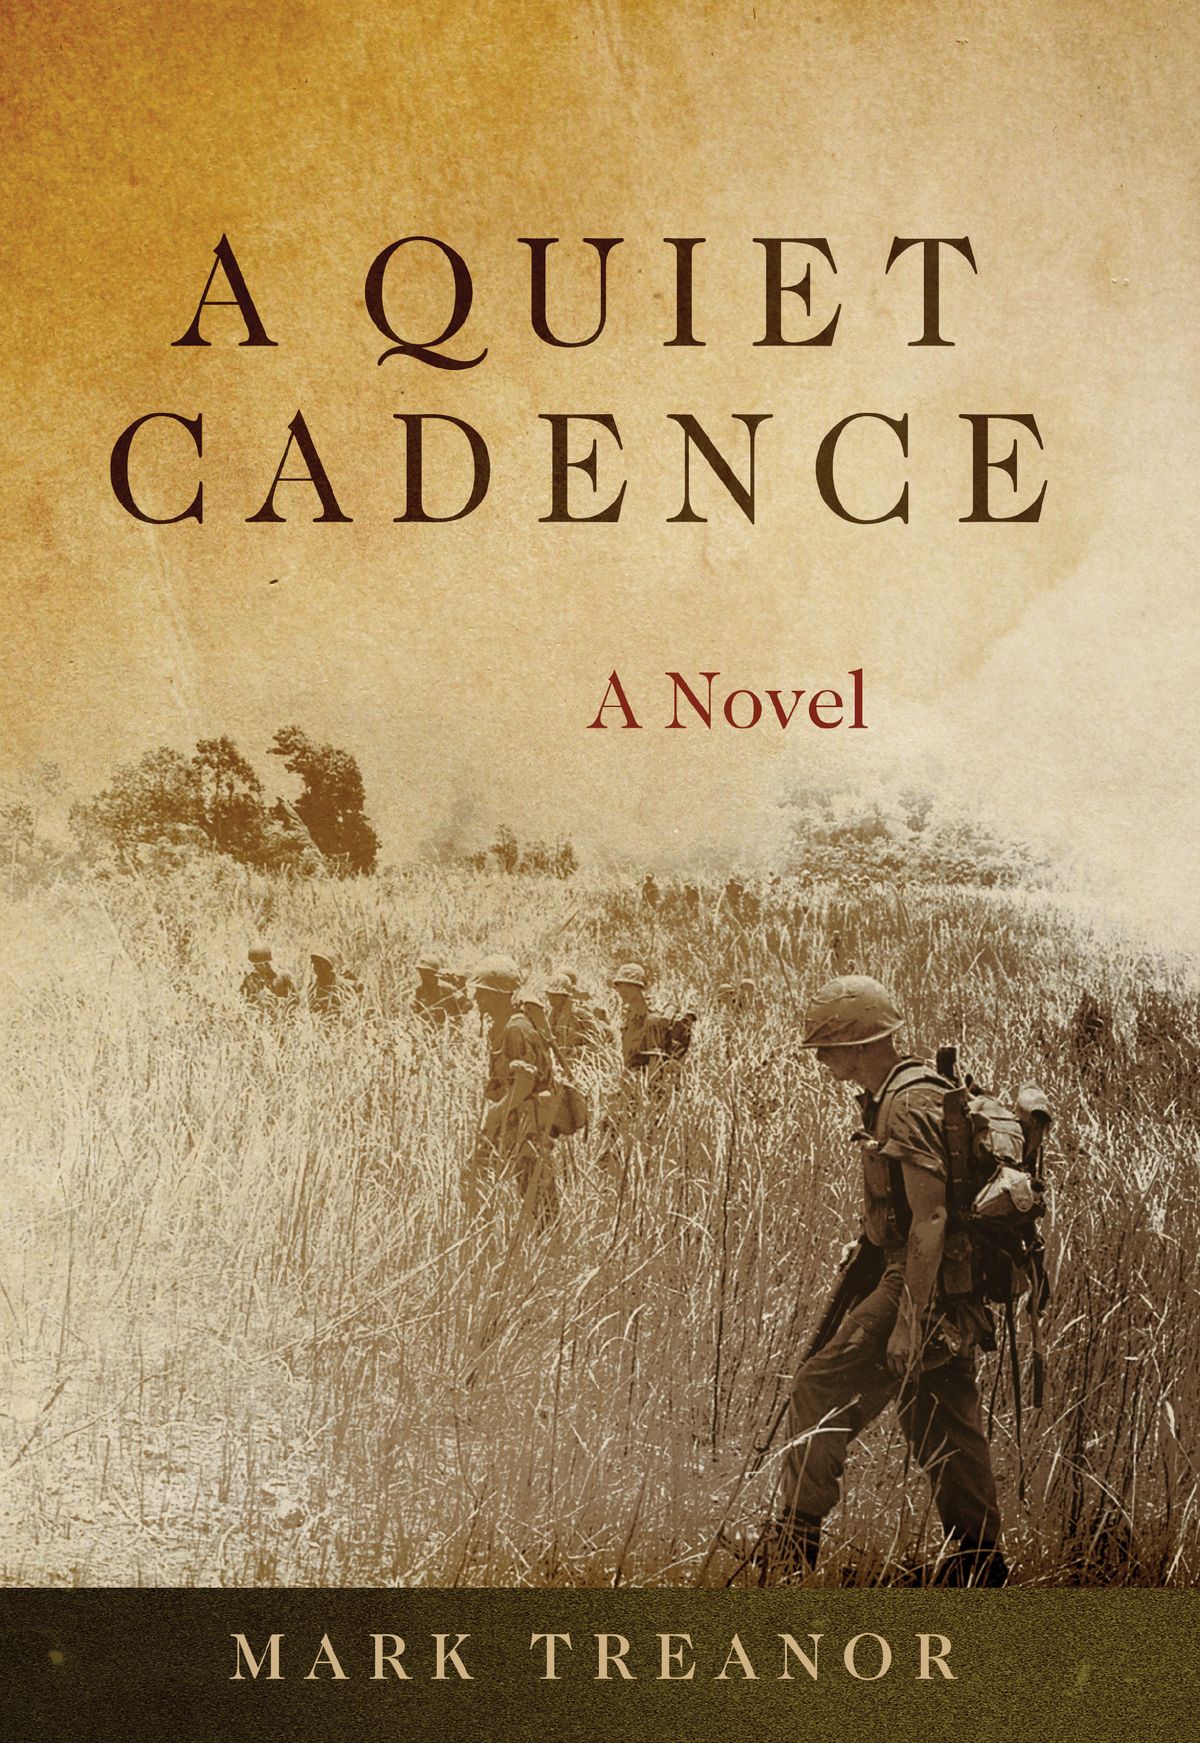 Image for "A Quiet Cadence"